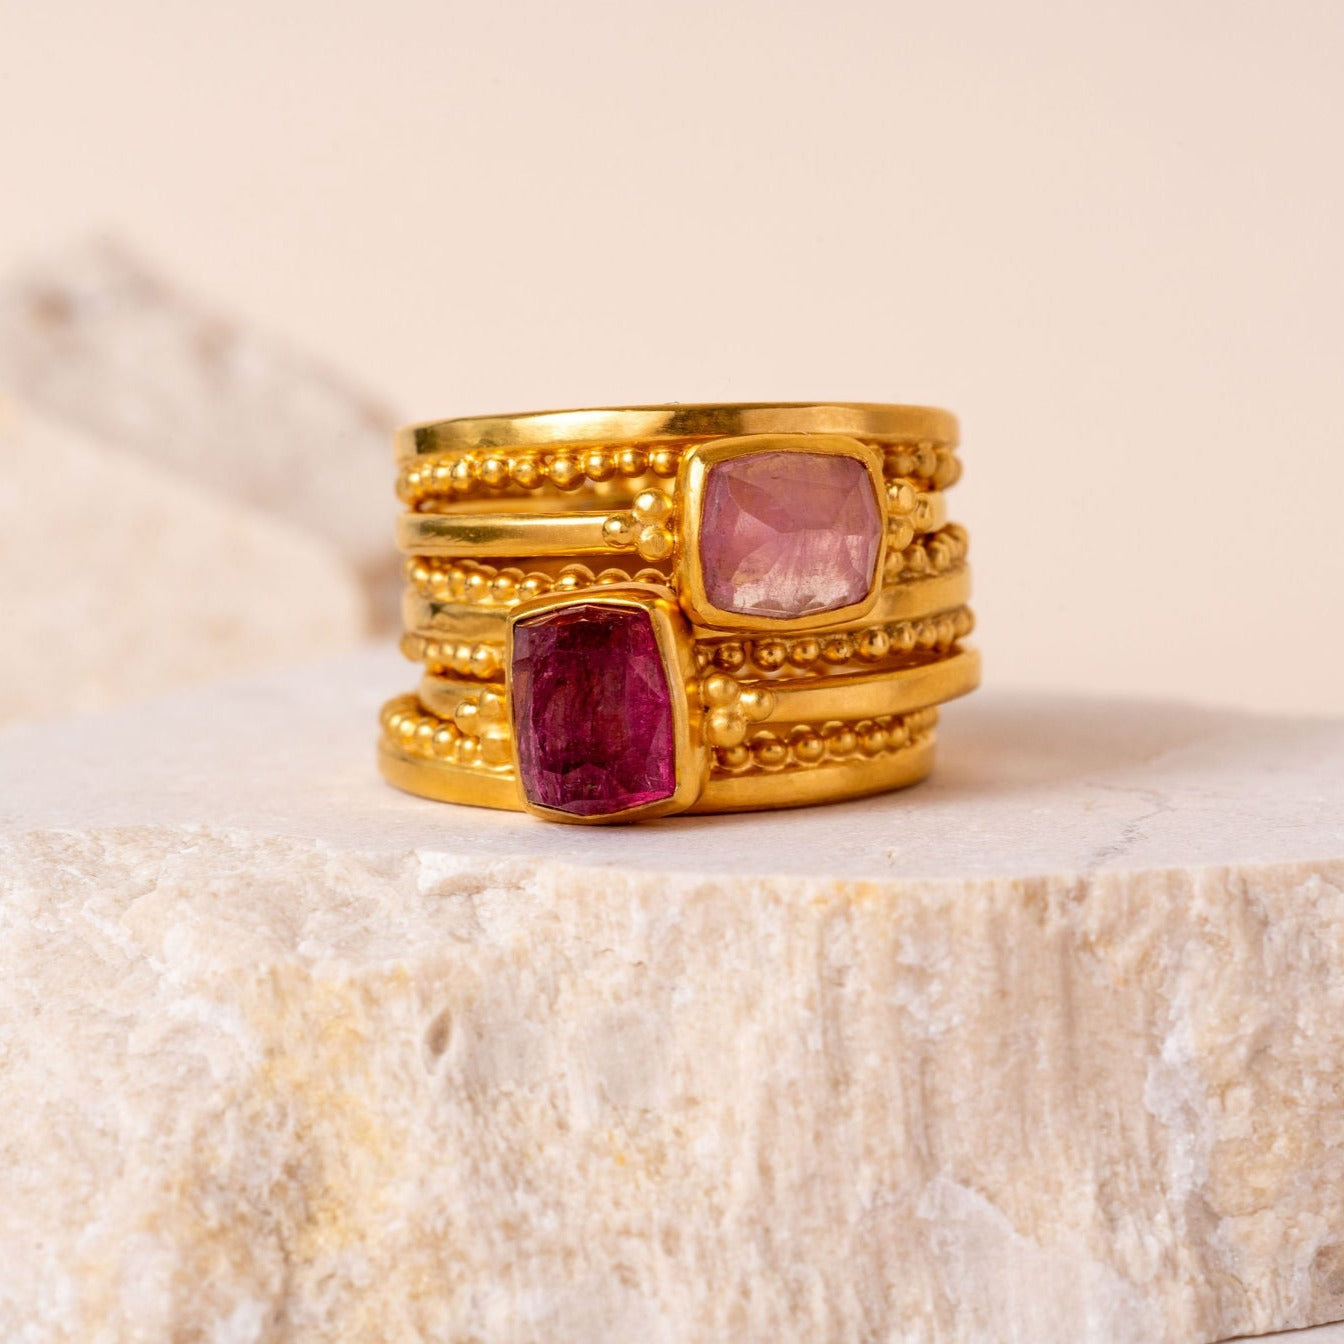 Gold ring stack showcasing brilliant pink rose-cut tourmaline and rich 24 carat vermeil.